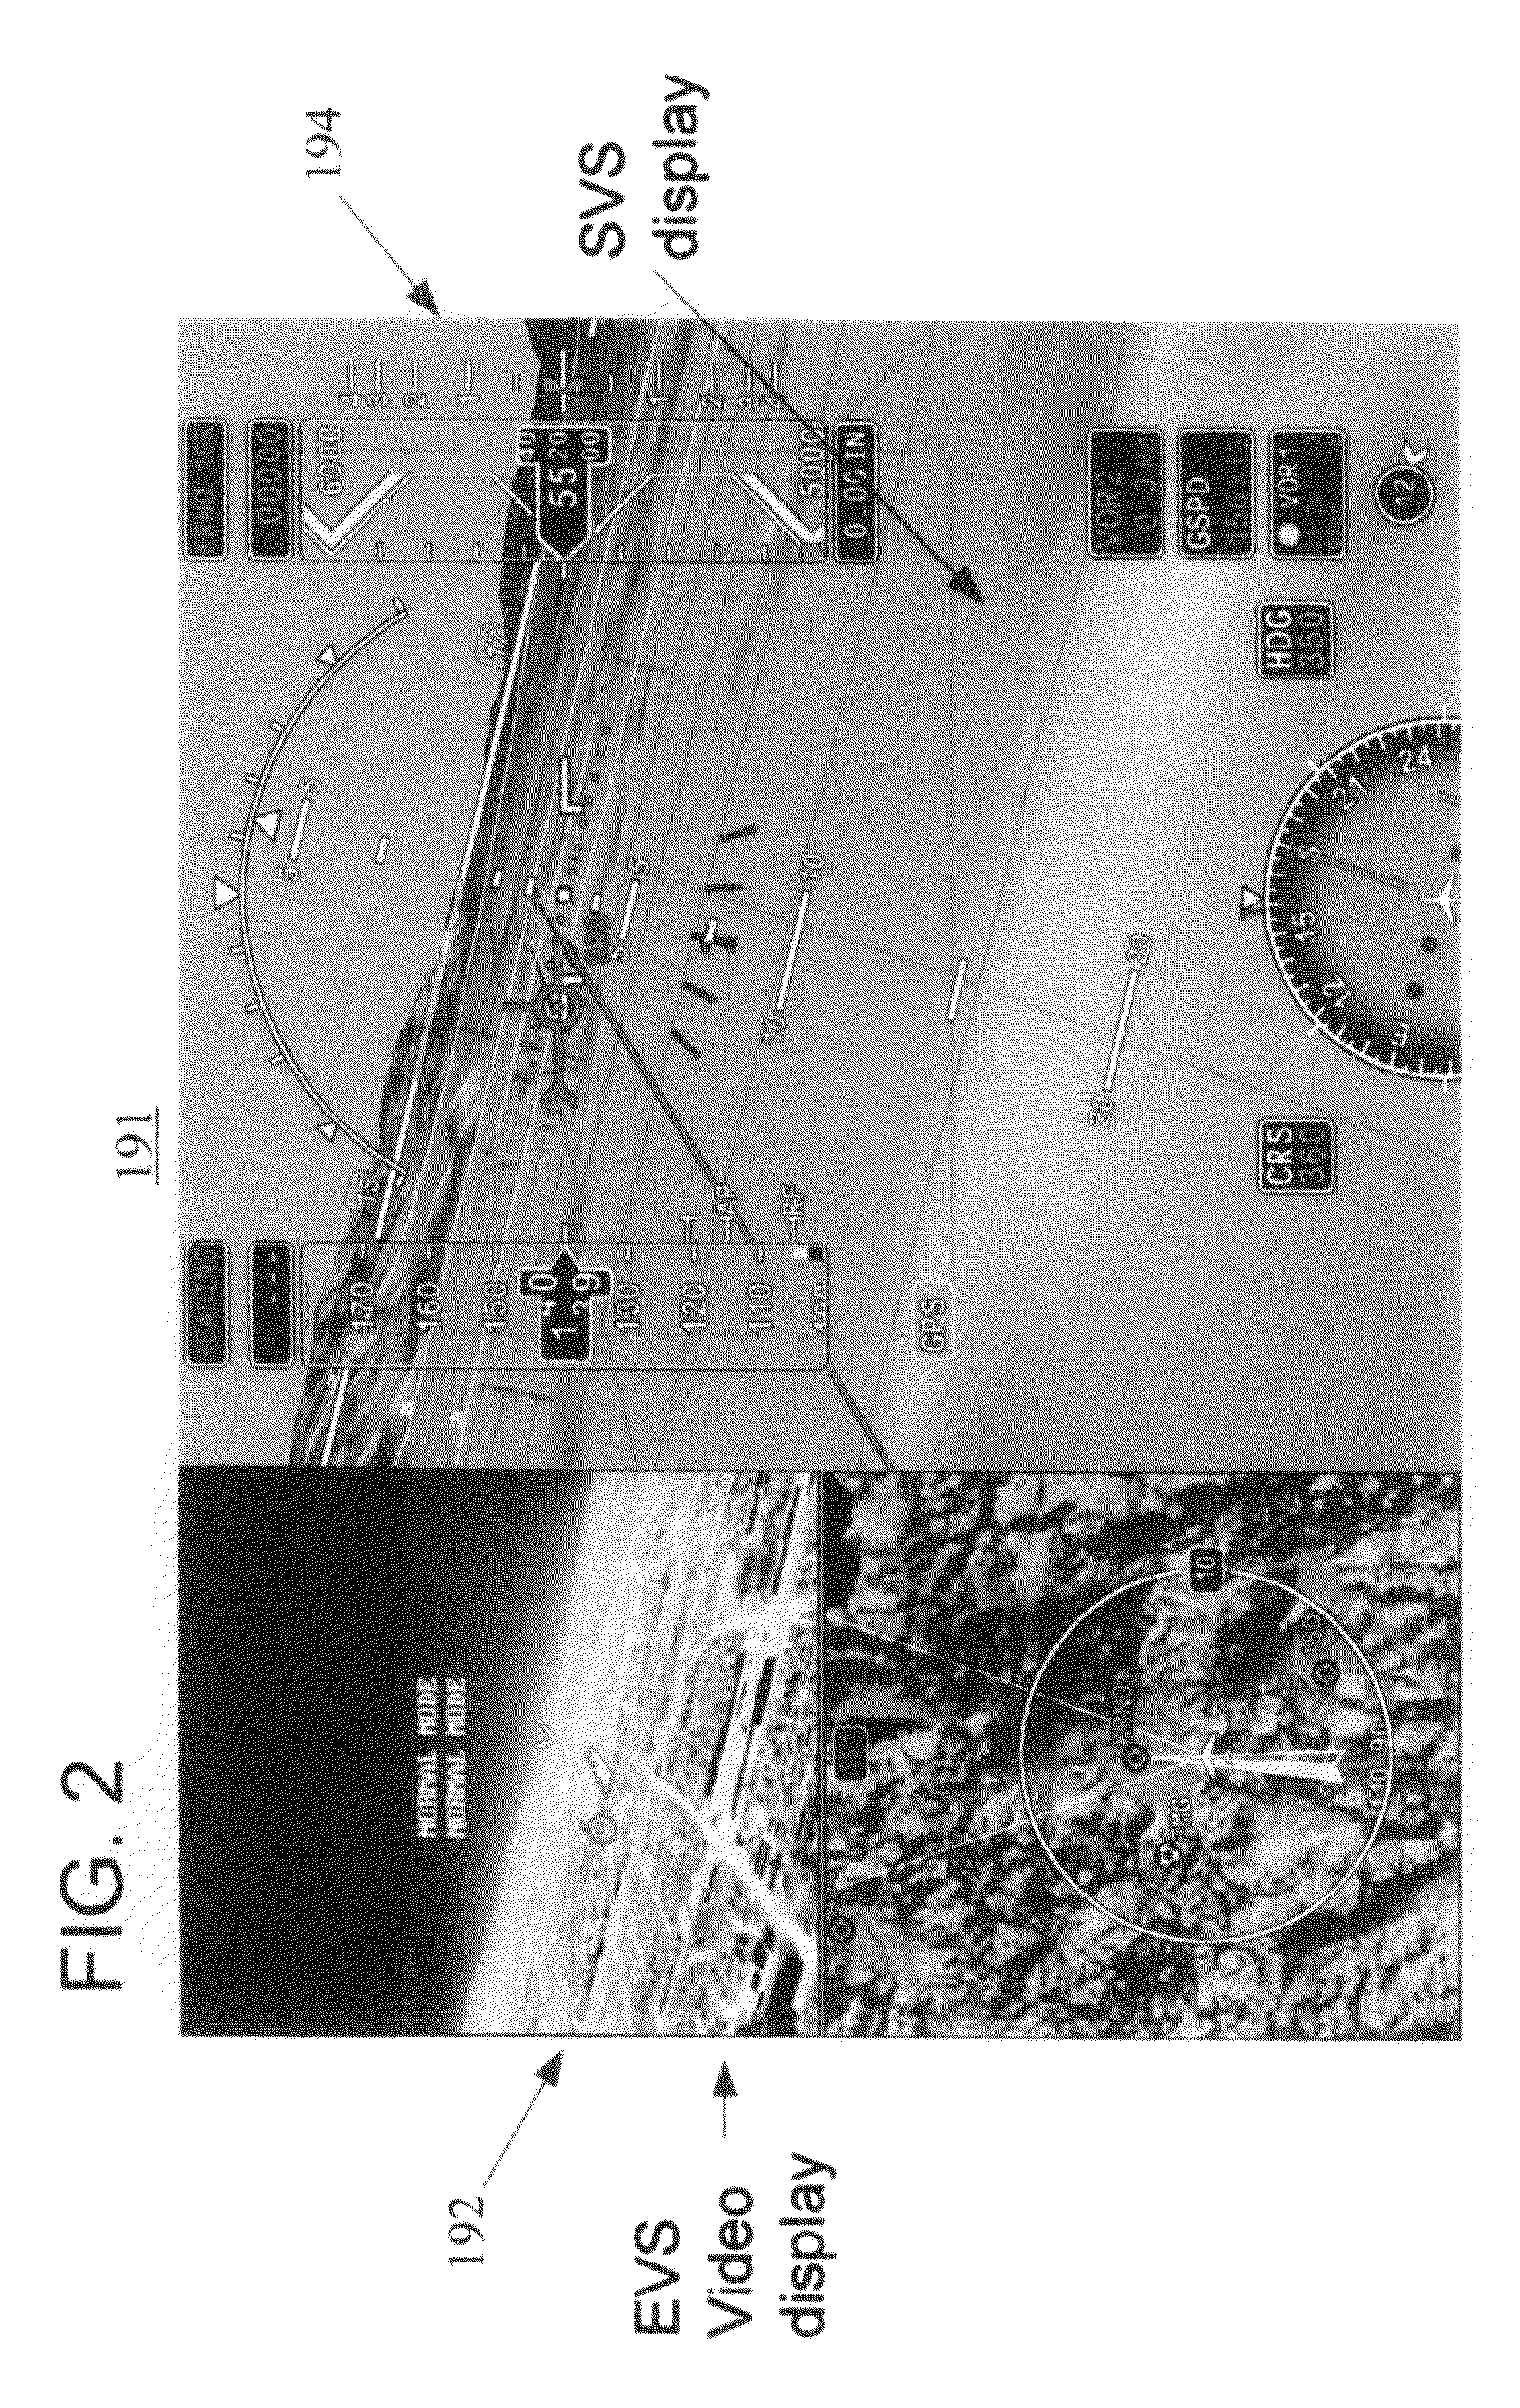 Vehicle display system and method with enhanced vision system and synthetic vision system image display